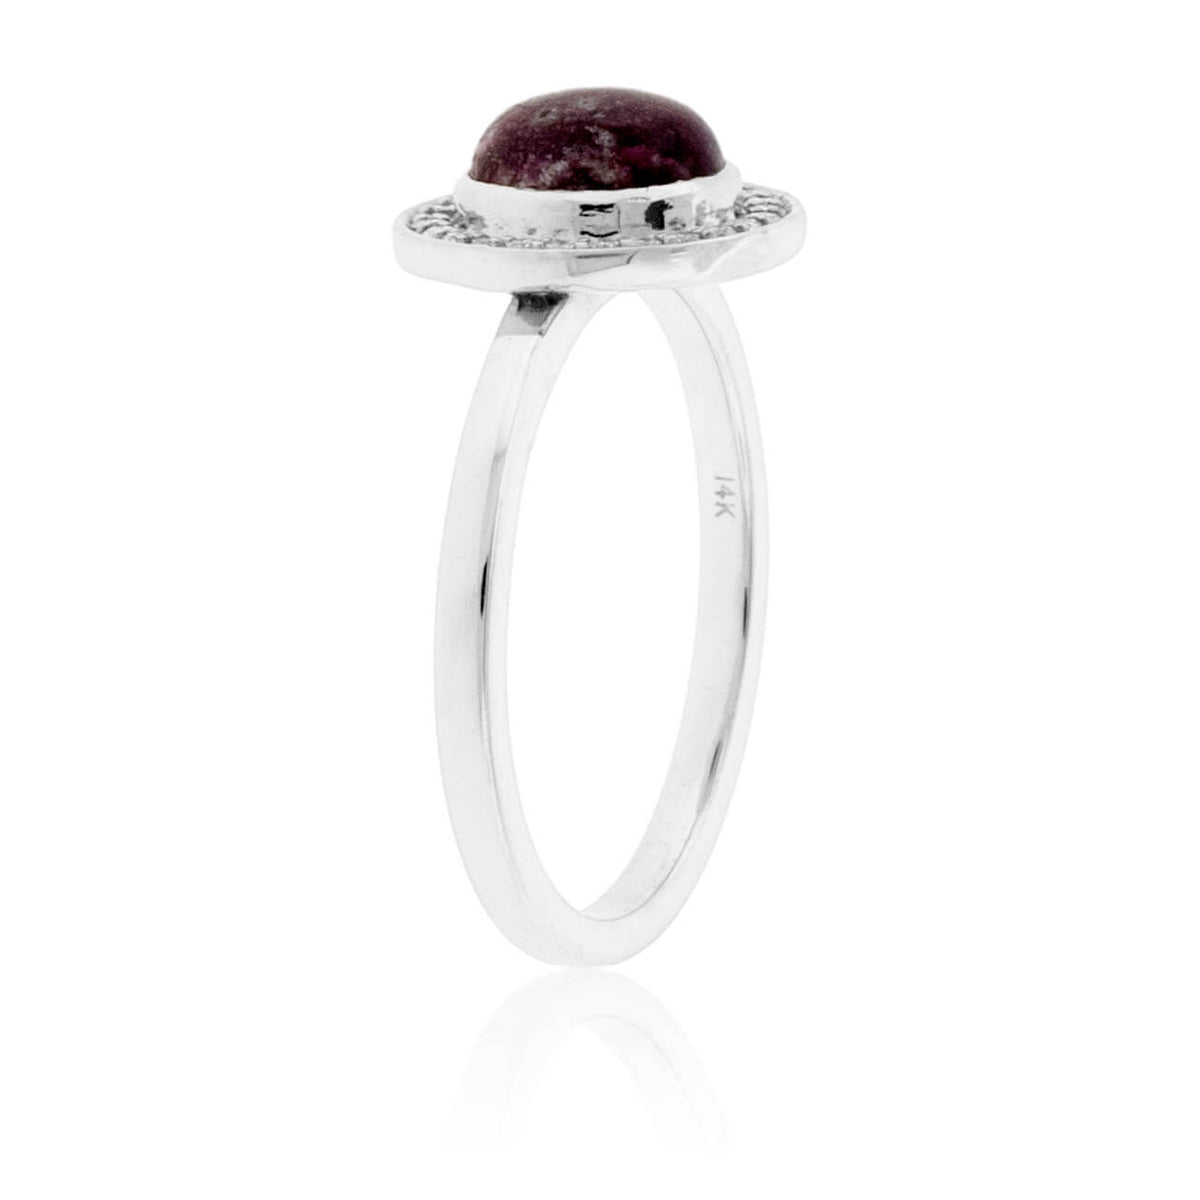 Red Emerald Cabochon with Diamond Halo Ring - Park City Jewelers